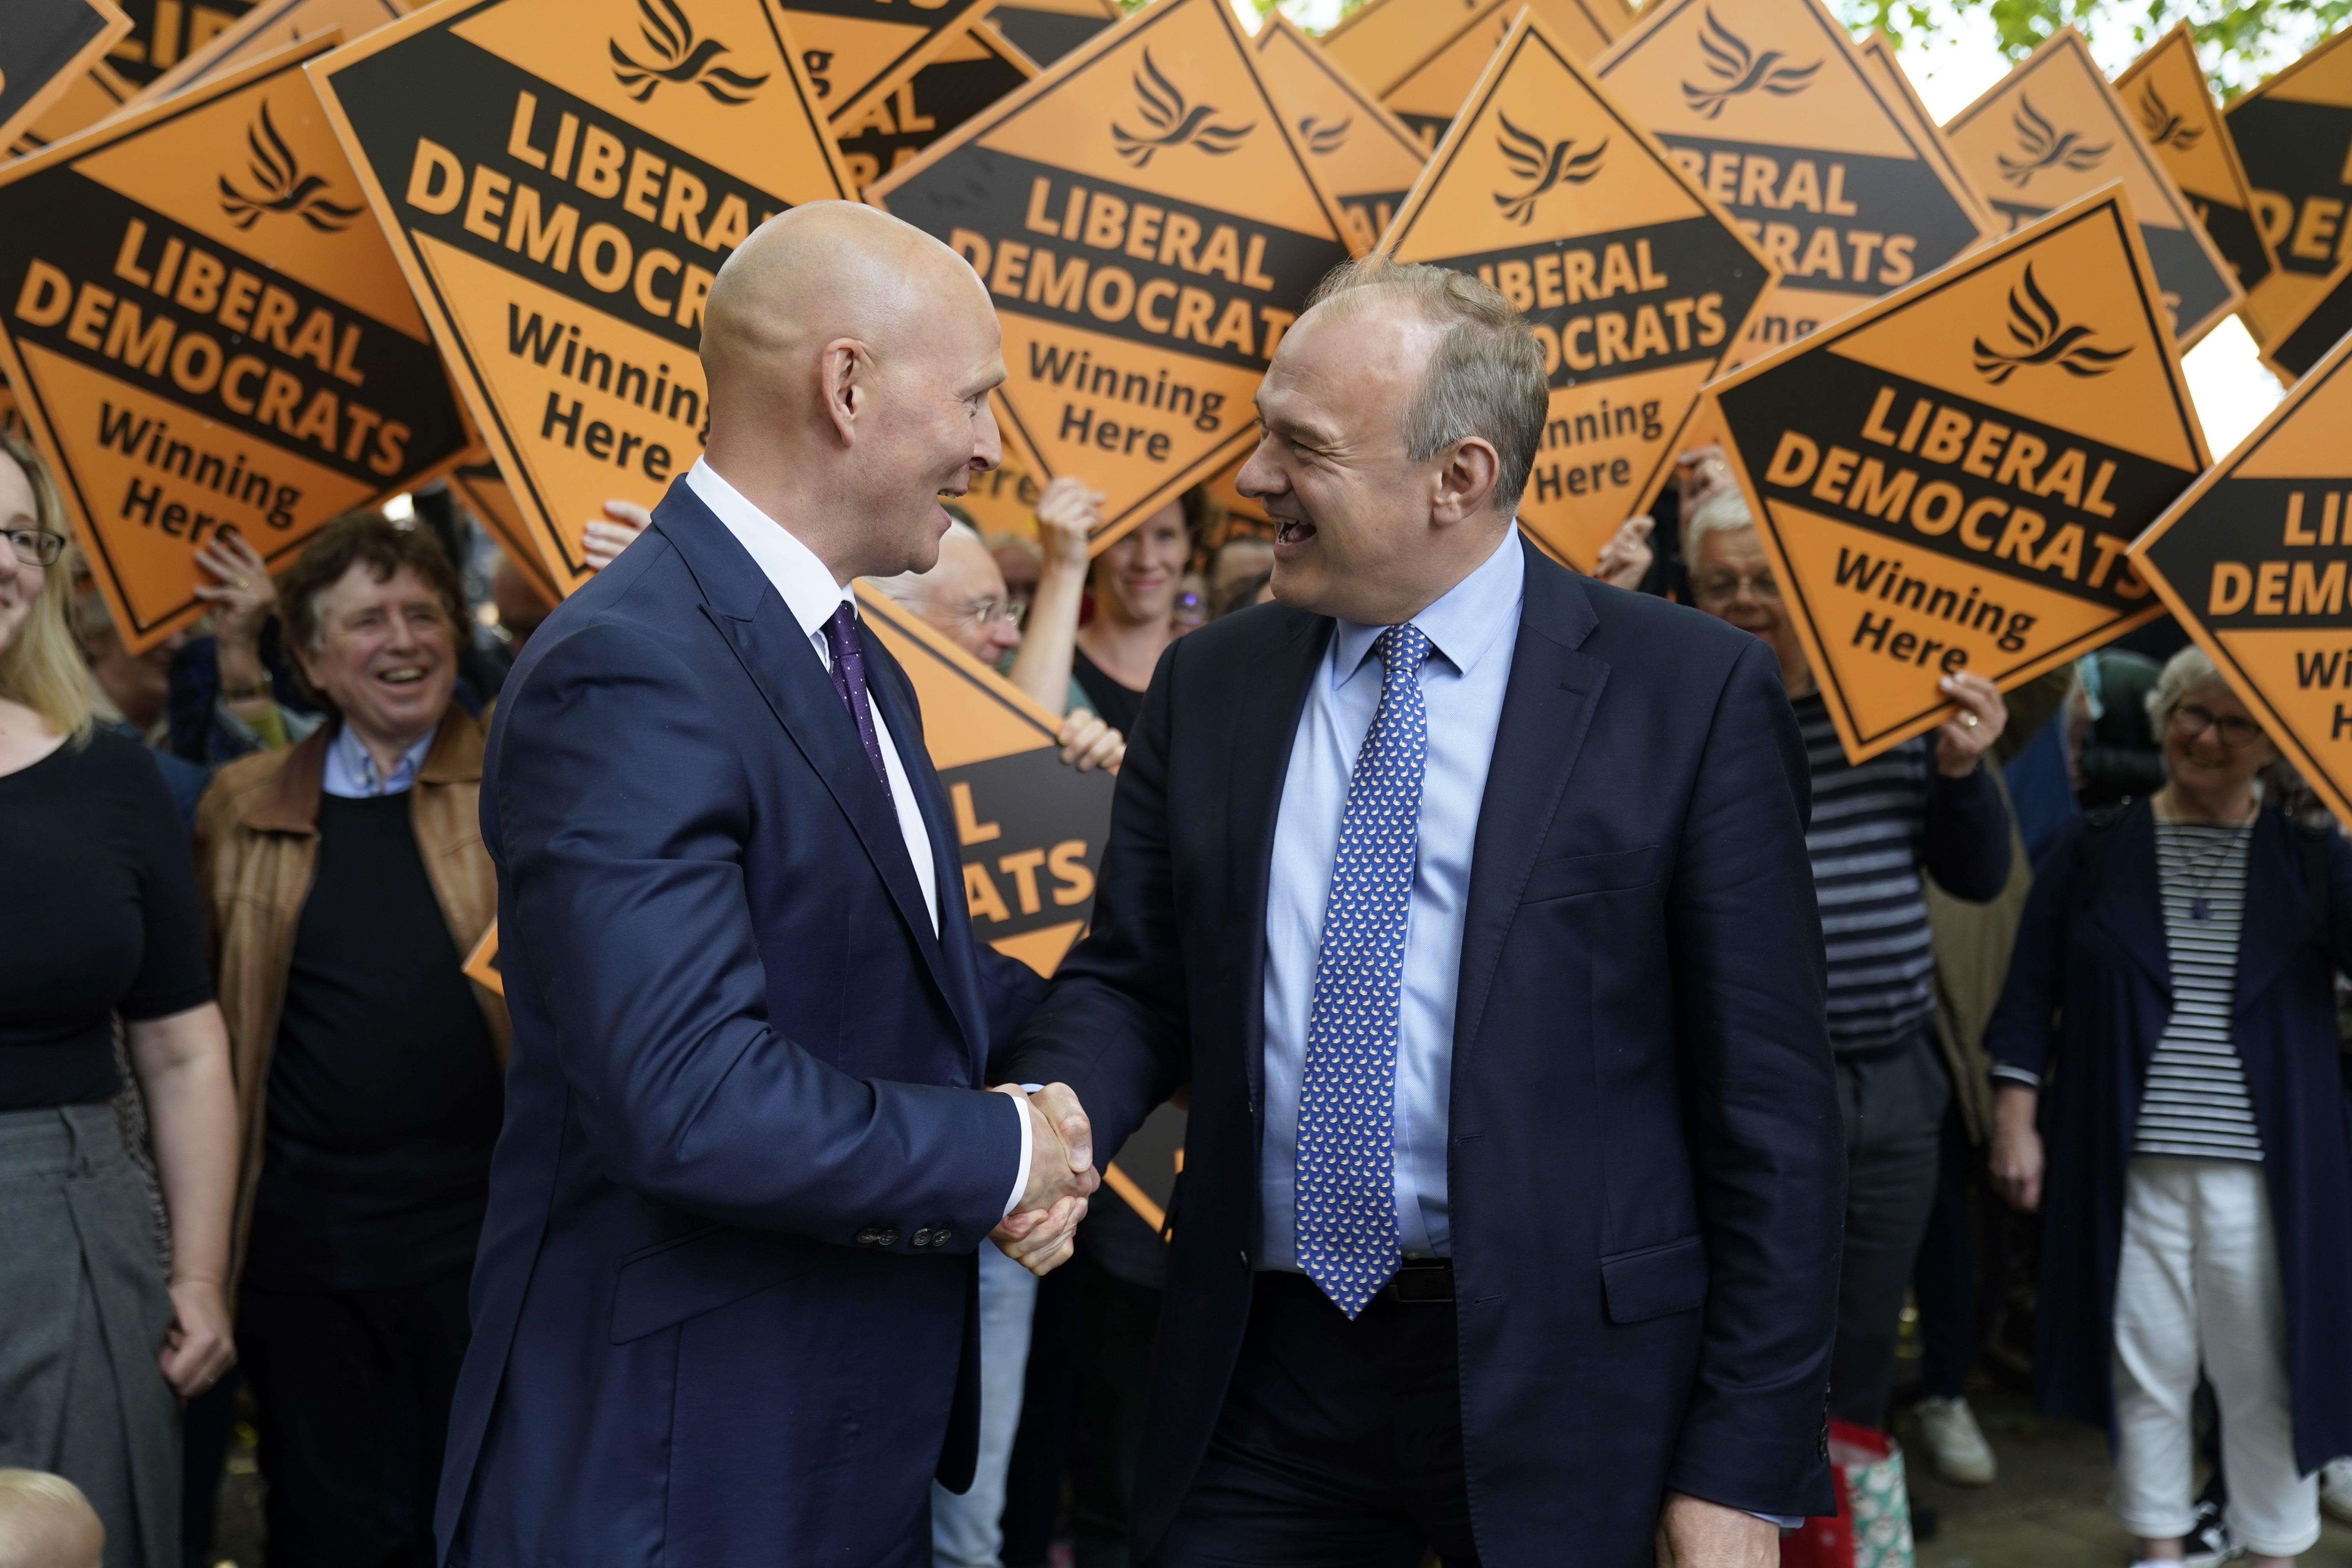 Liberal Democrat leader Sir Ed Davey (right) with Liberal Democrat parliamentary candidate for Cheltenham Max Wilkinson